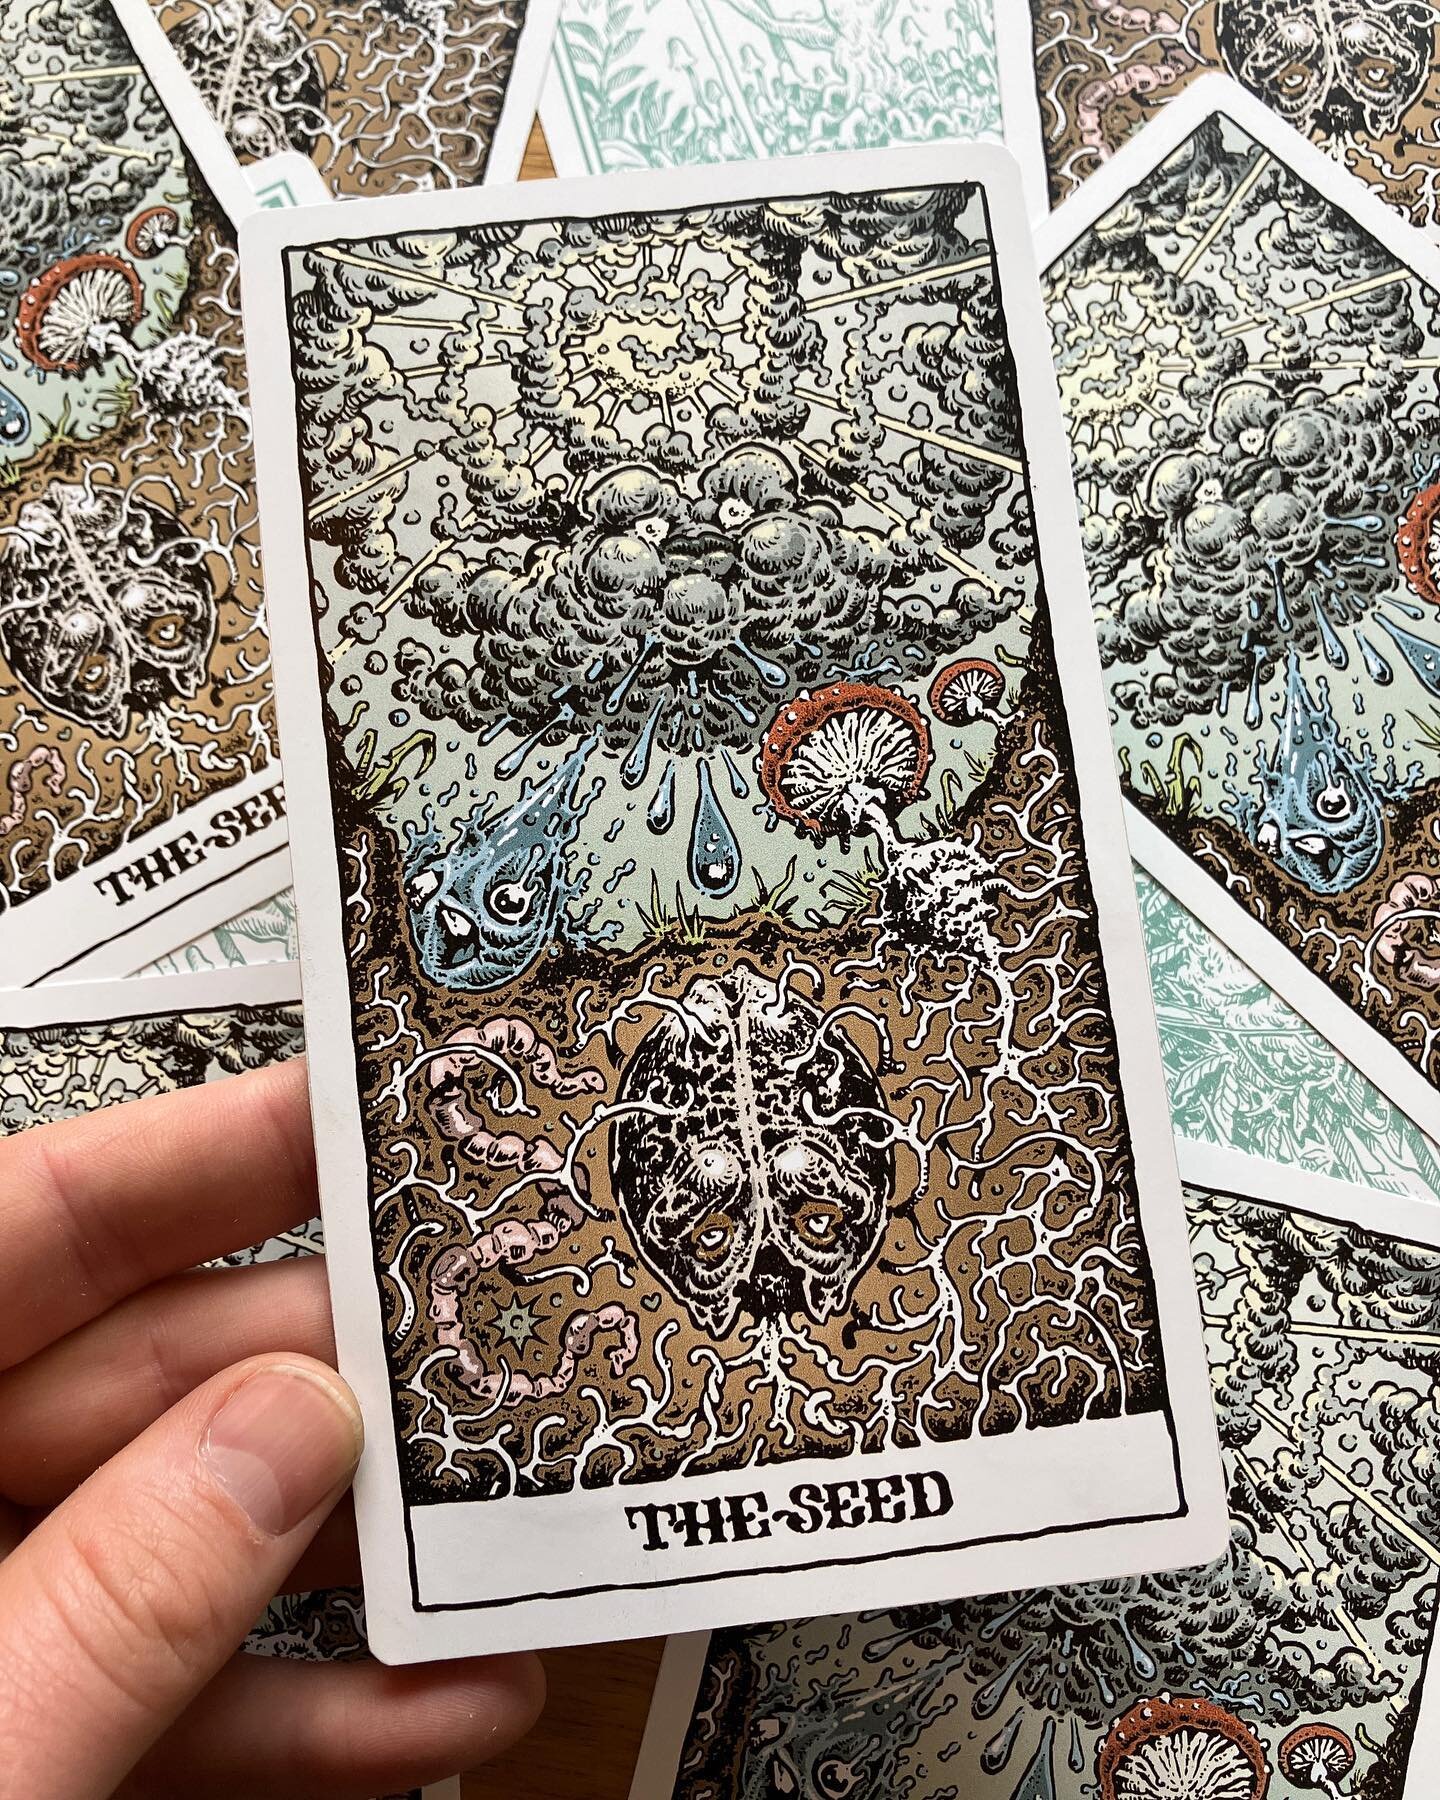 🌳🌿✨SEASON I. Card 1. THE SEED✨🌿🌳
The time of new beginnings and new life is here. Seeds are being planted these days. Make sure to give them plenty of warmth, water, sun and soil so they may grow all summer and into harvest.✨
.
Upcoming 04.20.23 